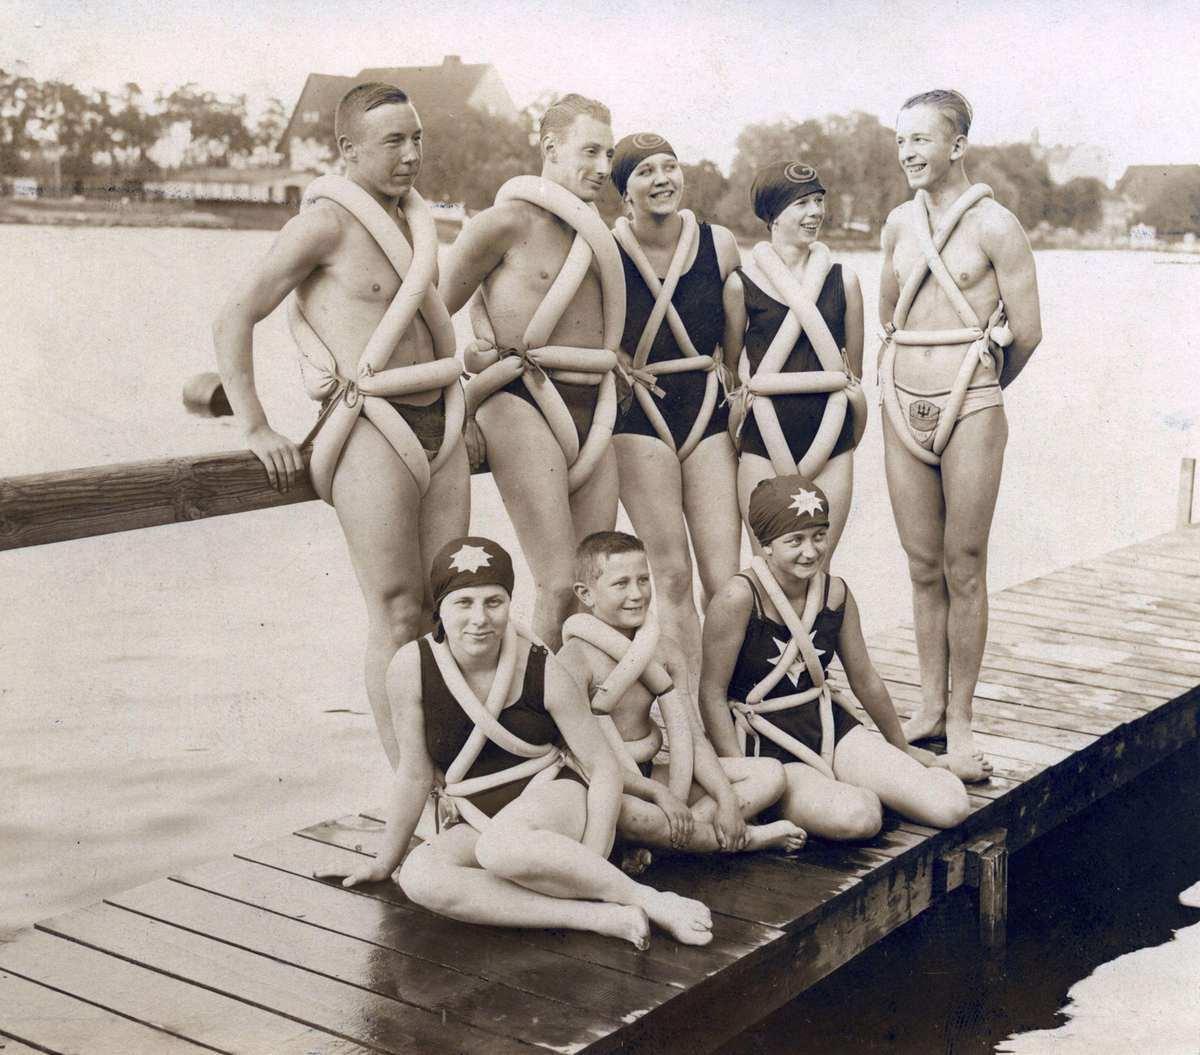 Retro photo, showing swimmers in 1920